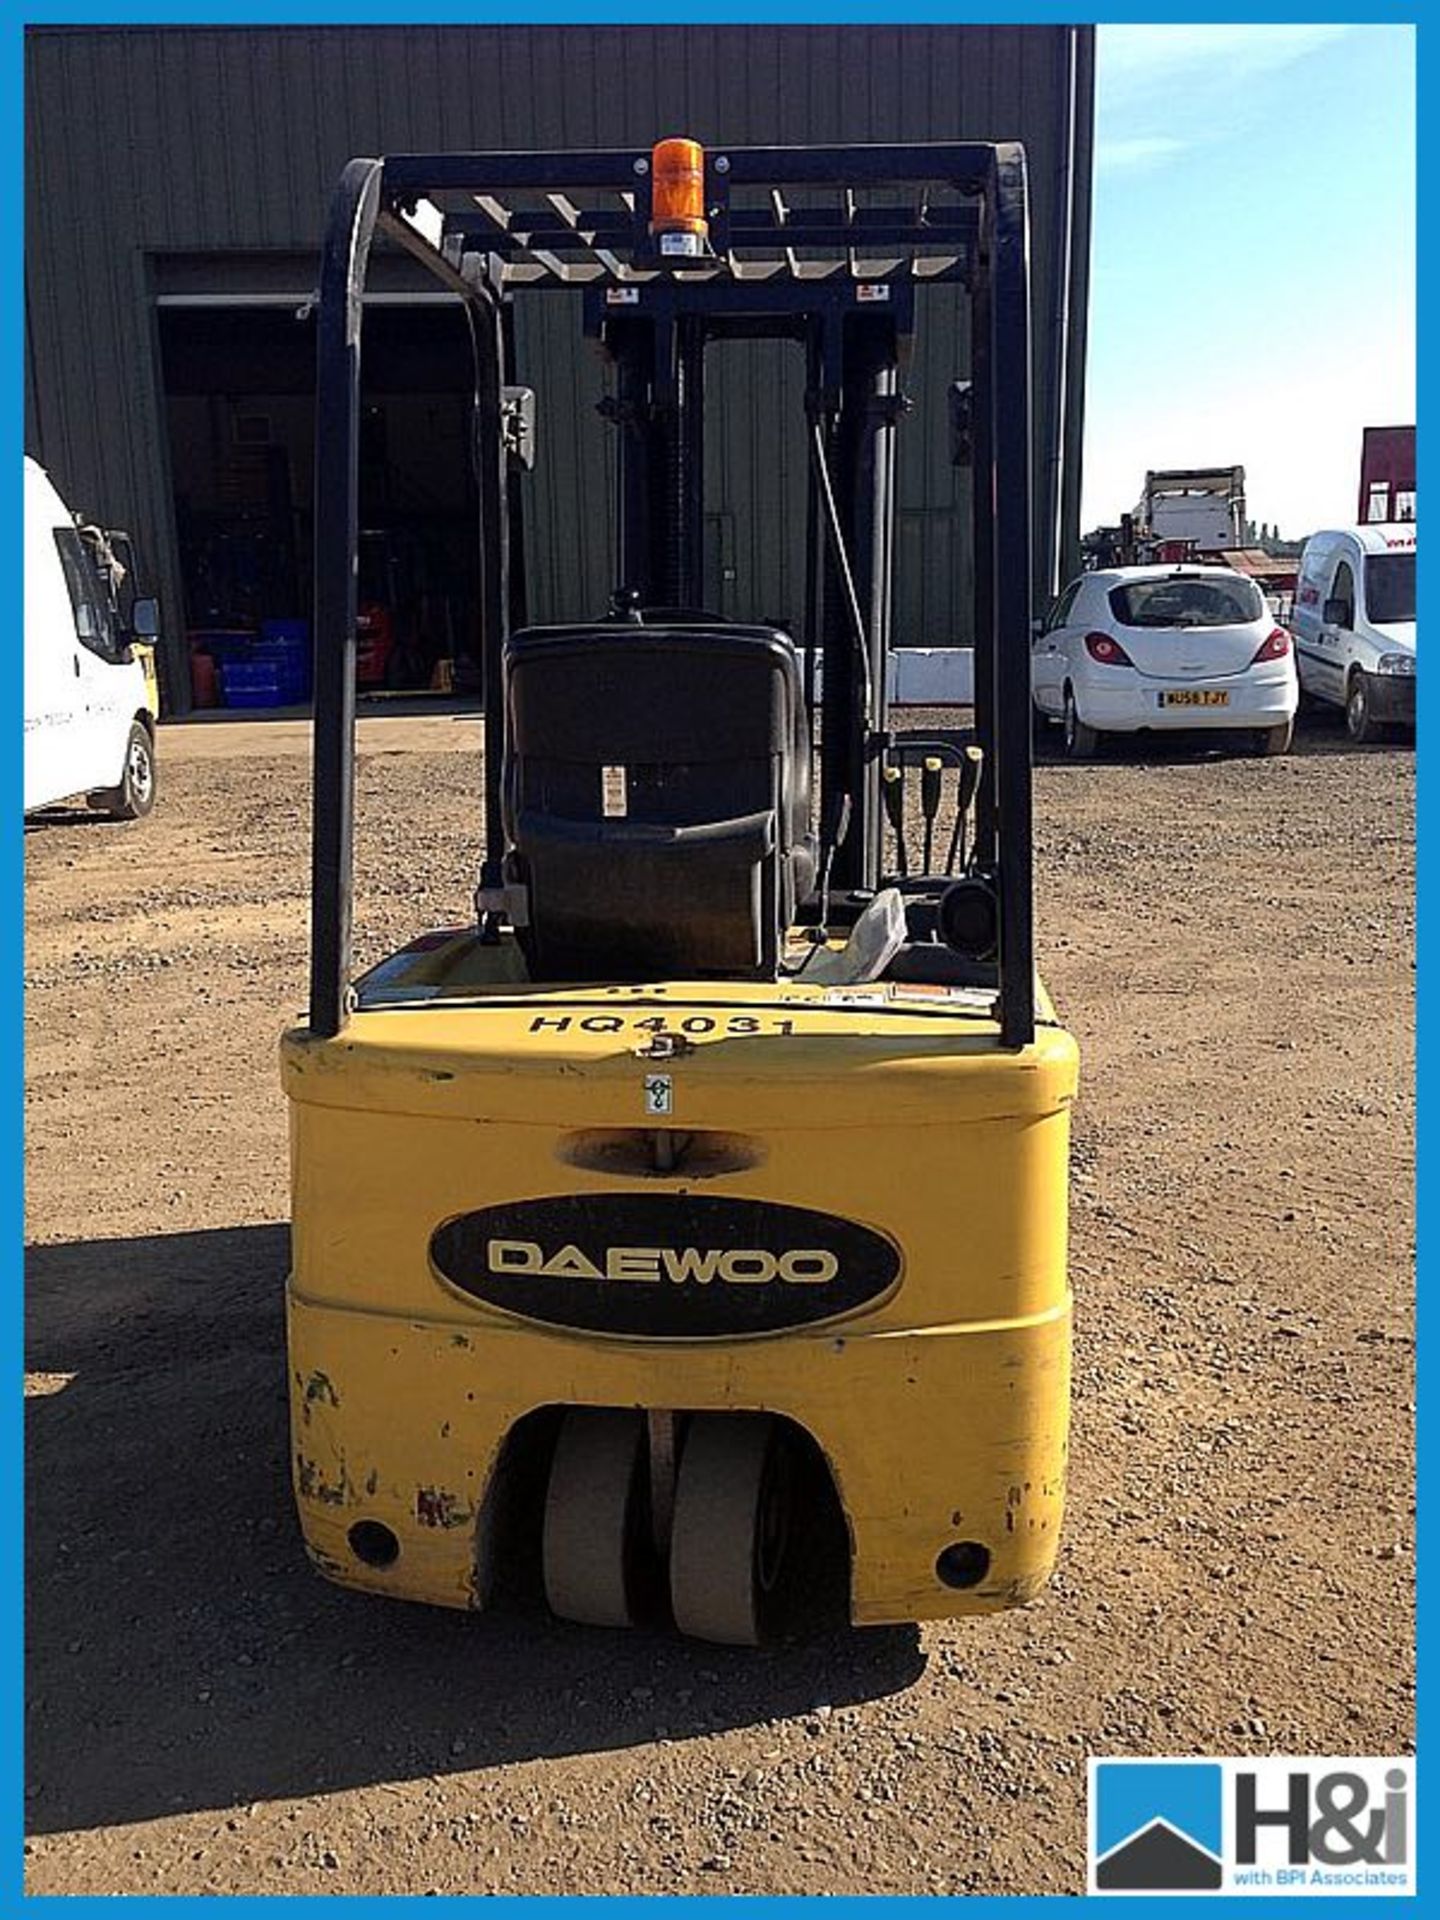 Daewoo B13T 1300 kg electric forklift side shift tilt Triplex mast 2004 year hours unknown running , - Image 3 of 8